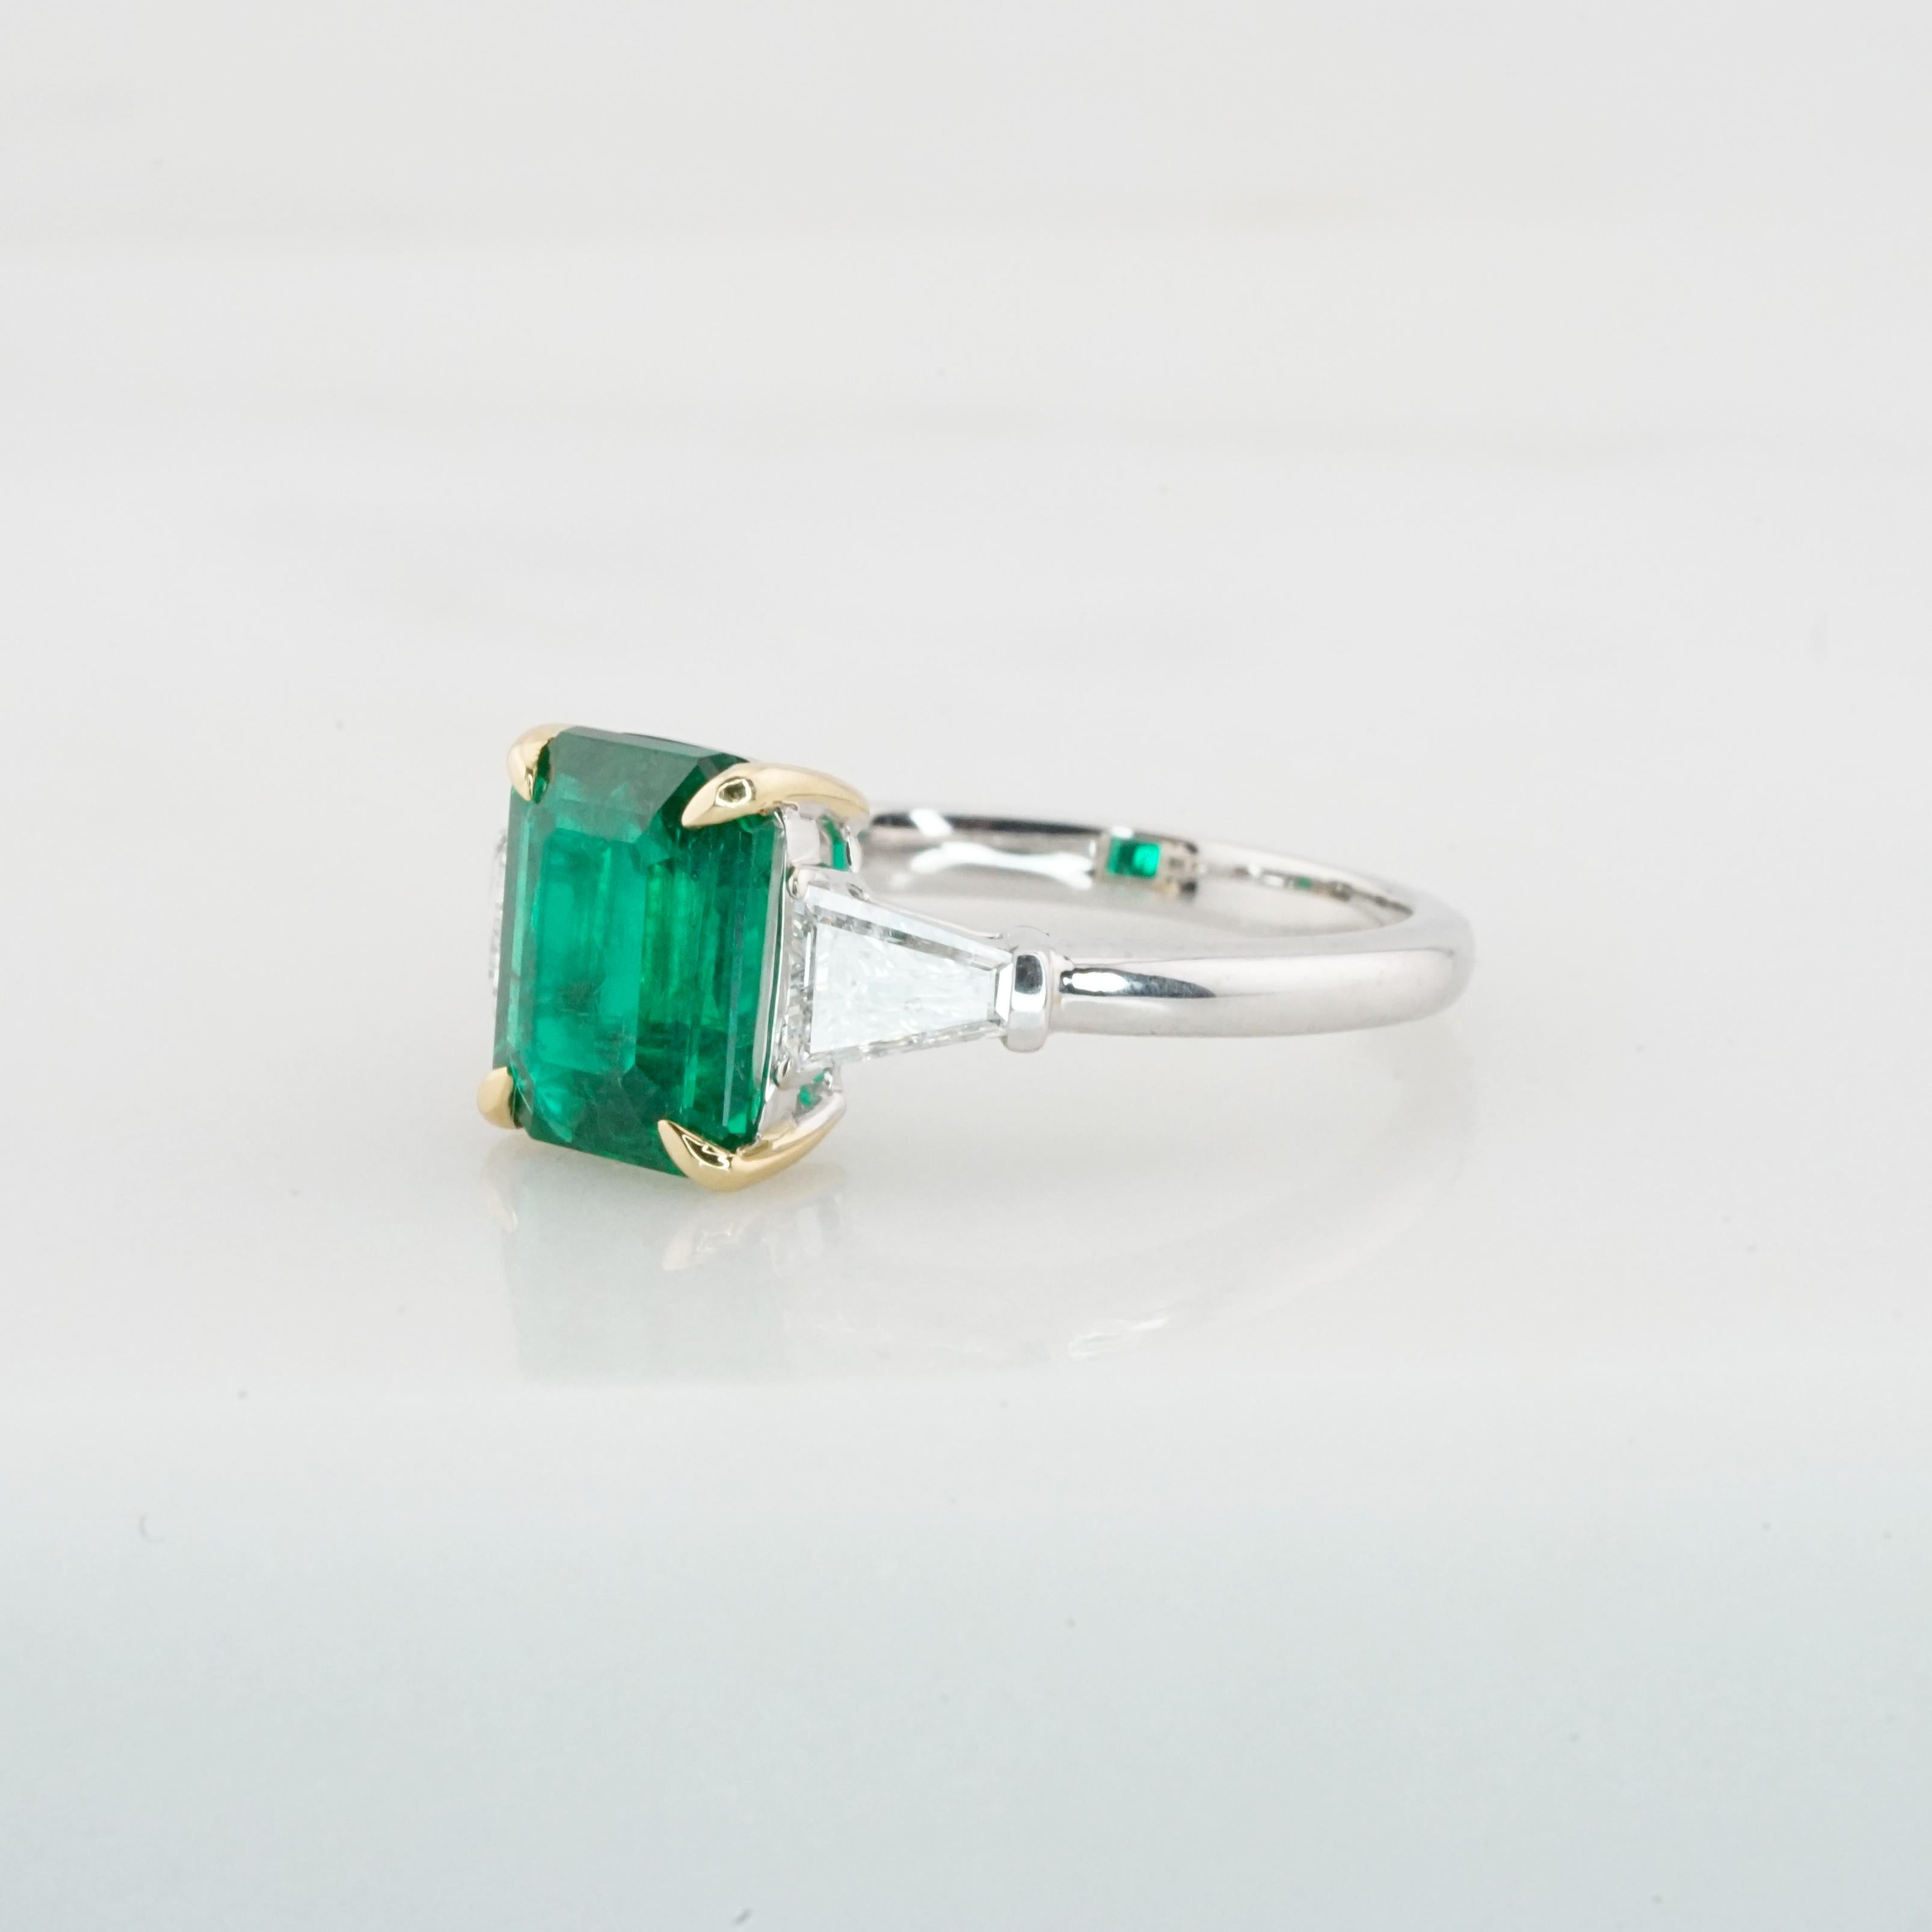 Featuring a GRS certified 2.43 carat emerald, this stunning ring is an embodiment of luxury and nature's artistry. The emerald, sourced from the majestic Himalayan Mountains, boasts a profound green hue that echoes the depths of ancient forests.